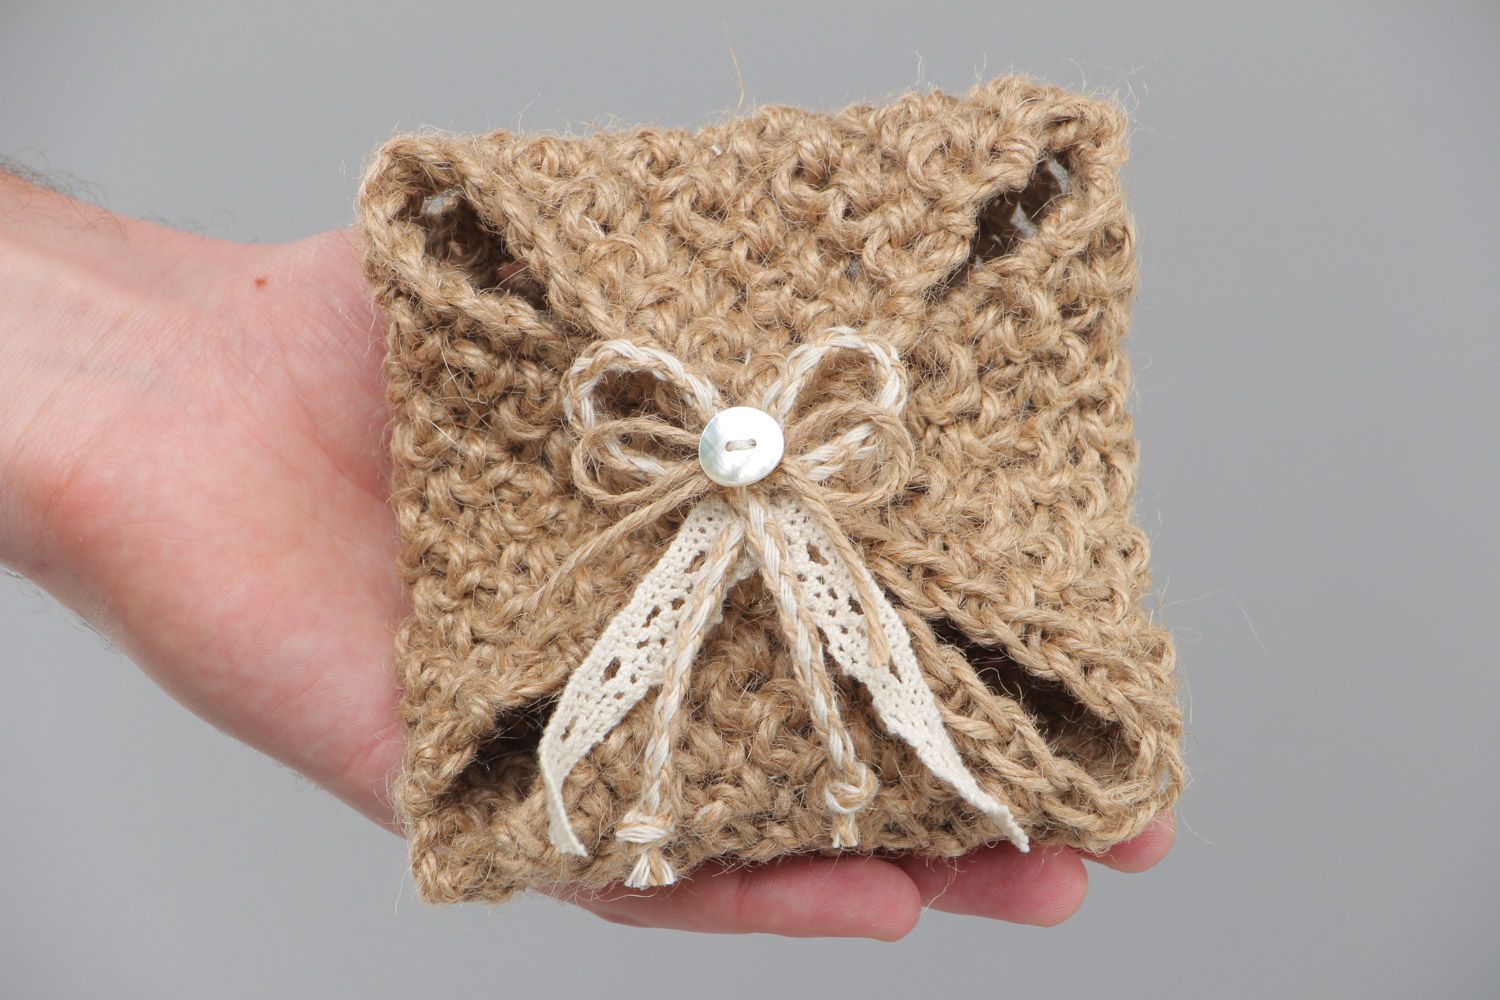 Handmade unusual wedding ring bearer pillow crocheted of jute with lace  photo 5